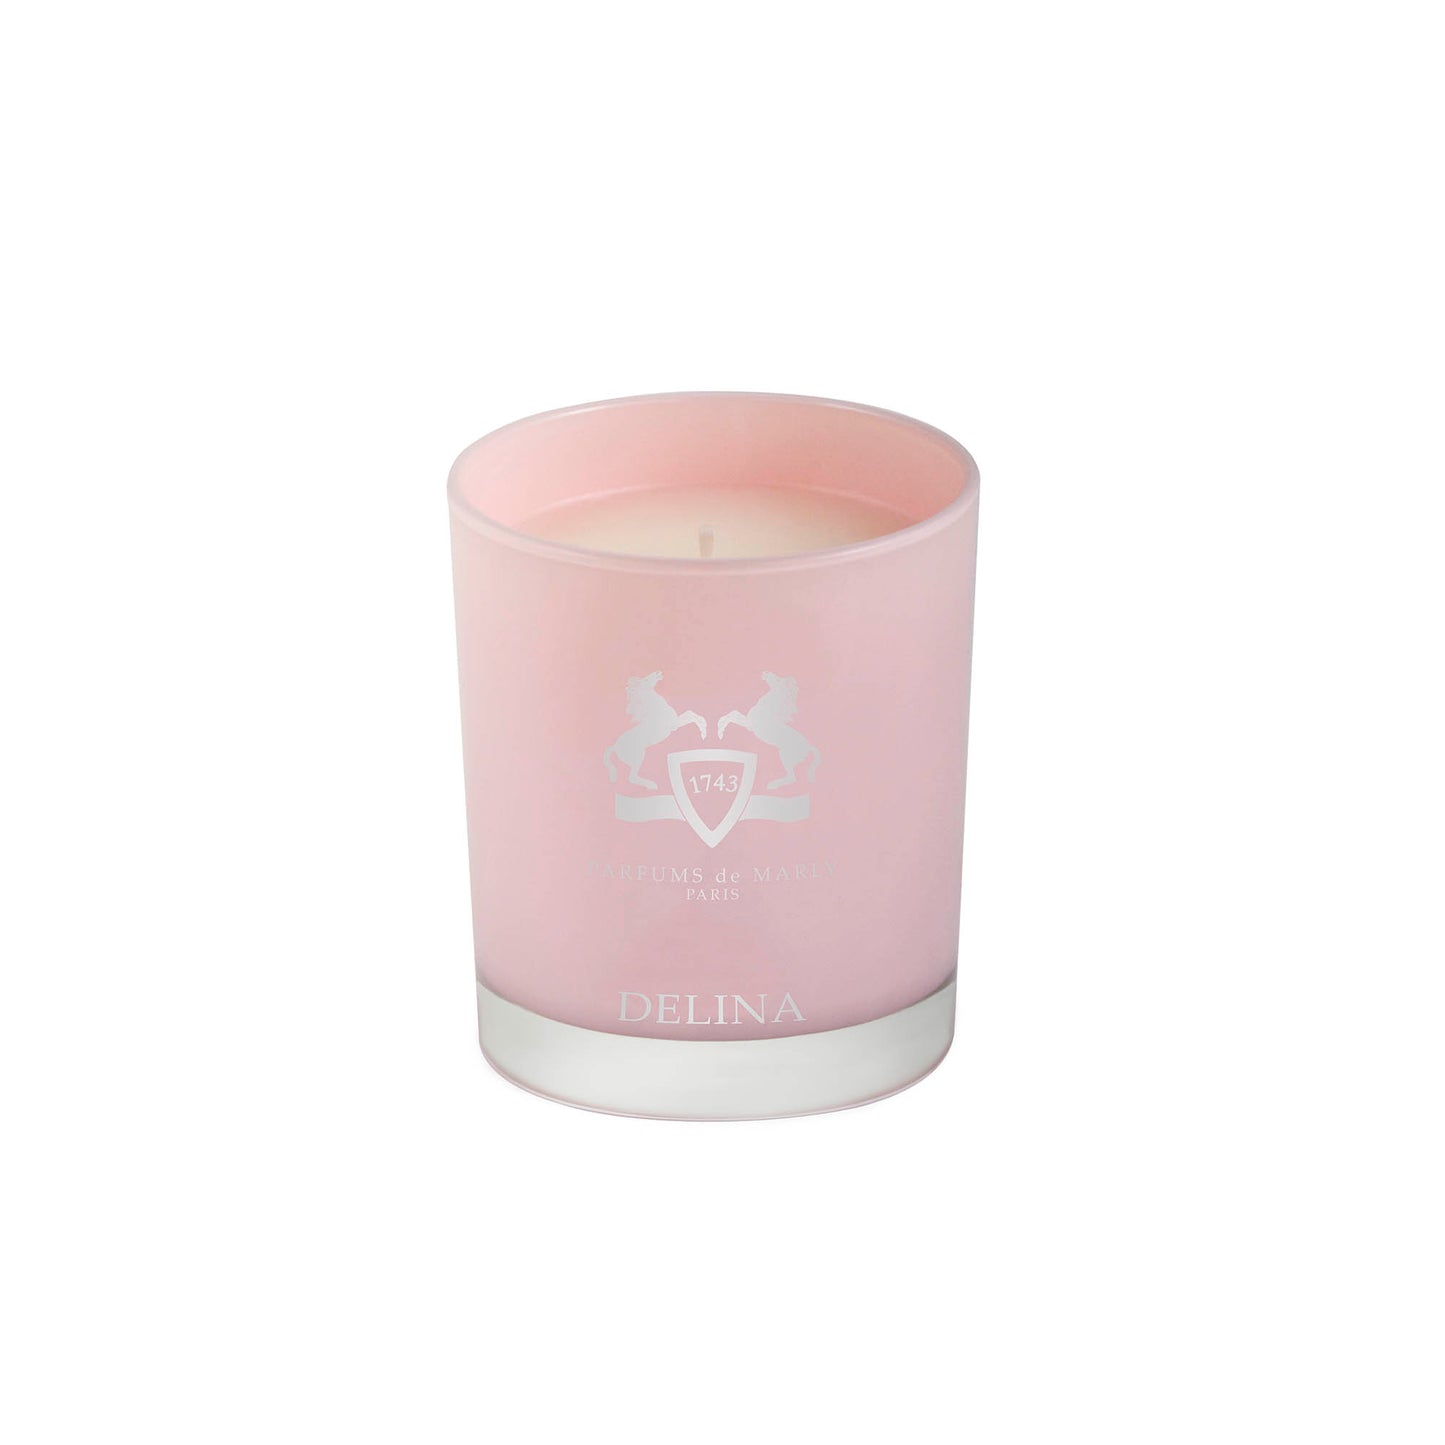 DELINA Candle - 180g